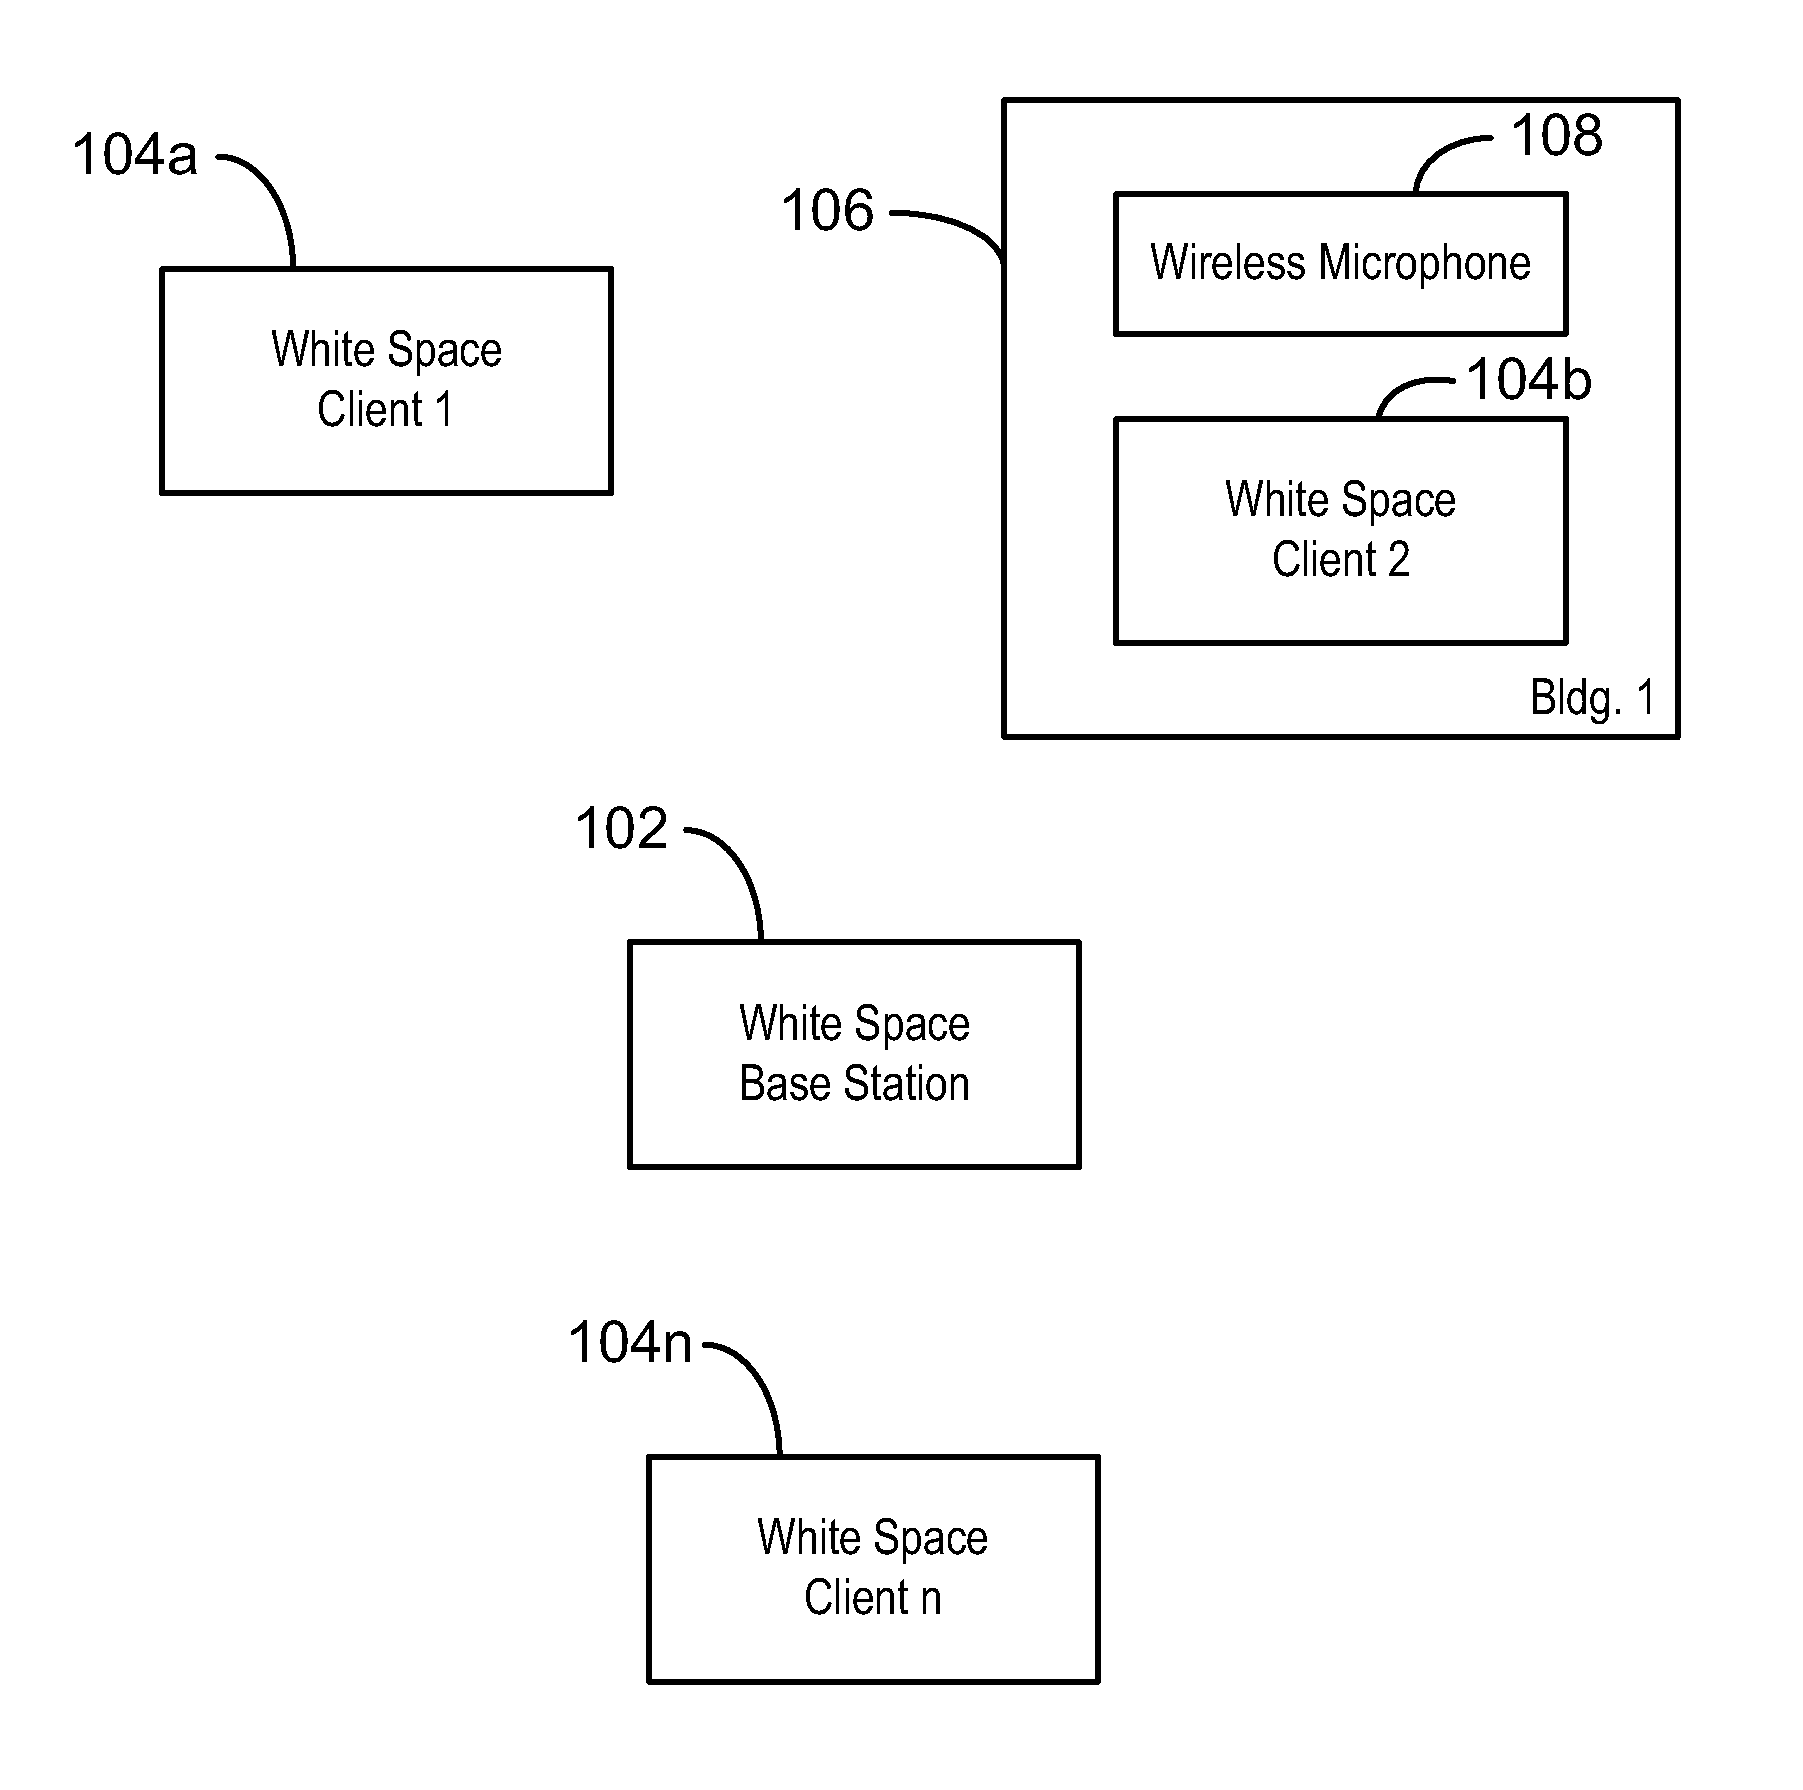 Transmitting data in a wireless white space network